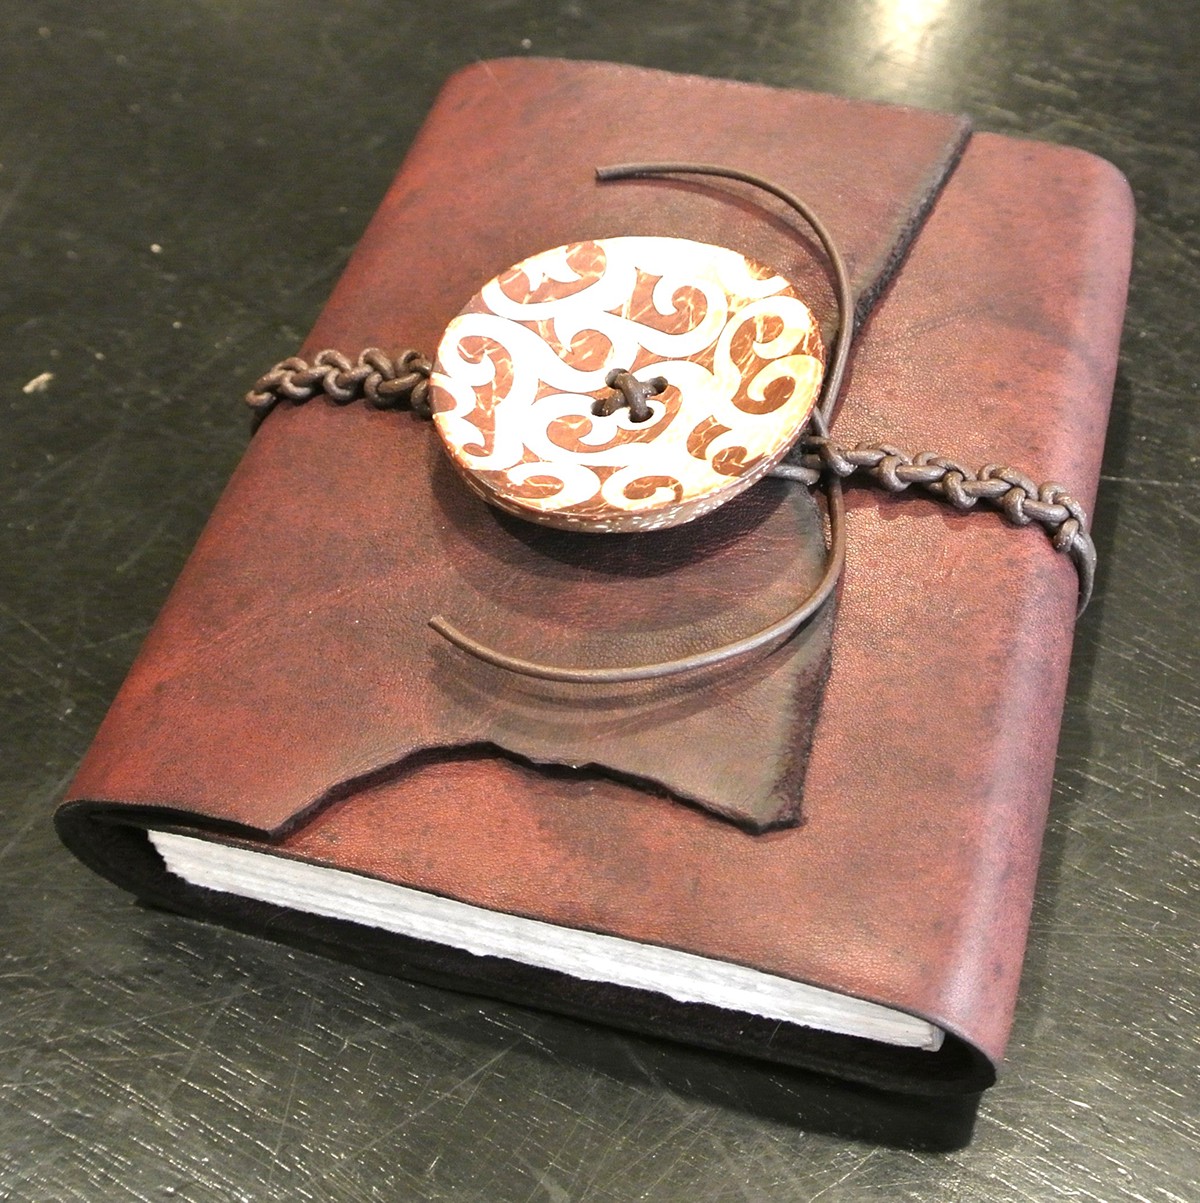 leather journal Leather Journal burn emboss book Custom handmade Handmade leather journal paper pyrography engrave Diary Handmade leather diary Leather diary pendant handcrafted rustic